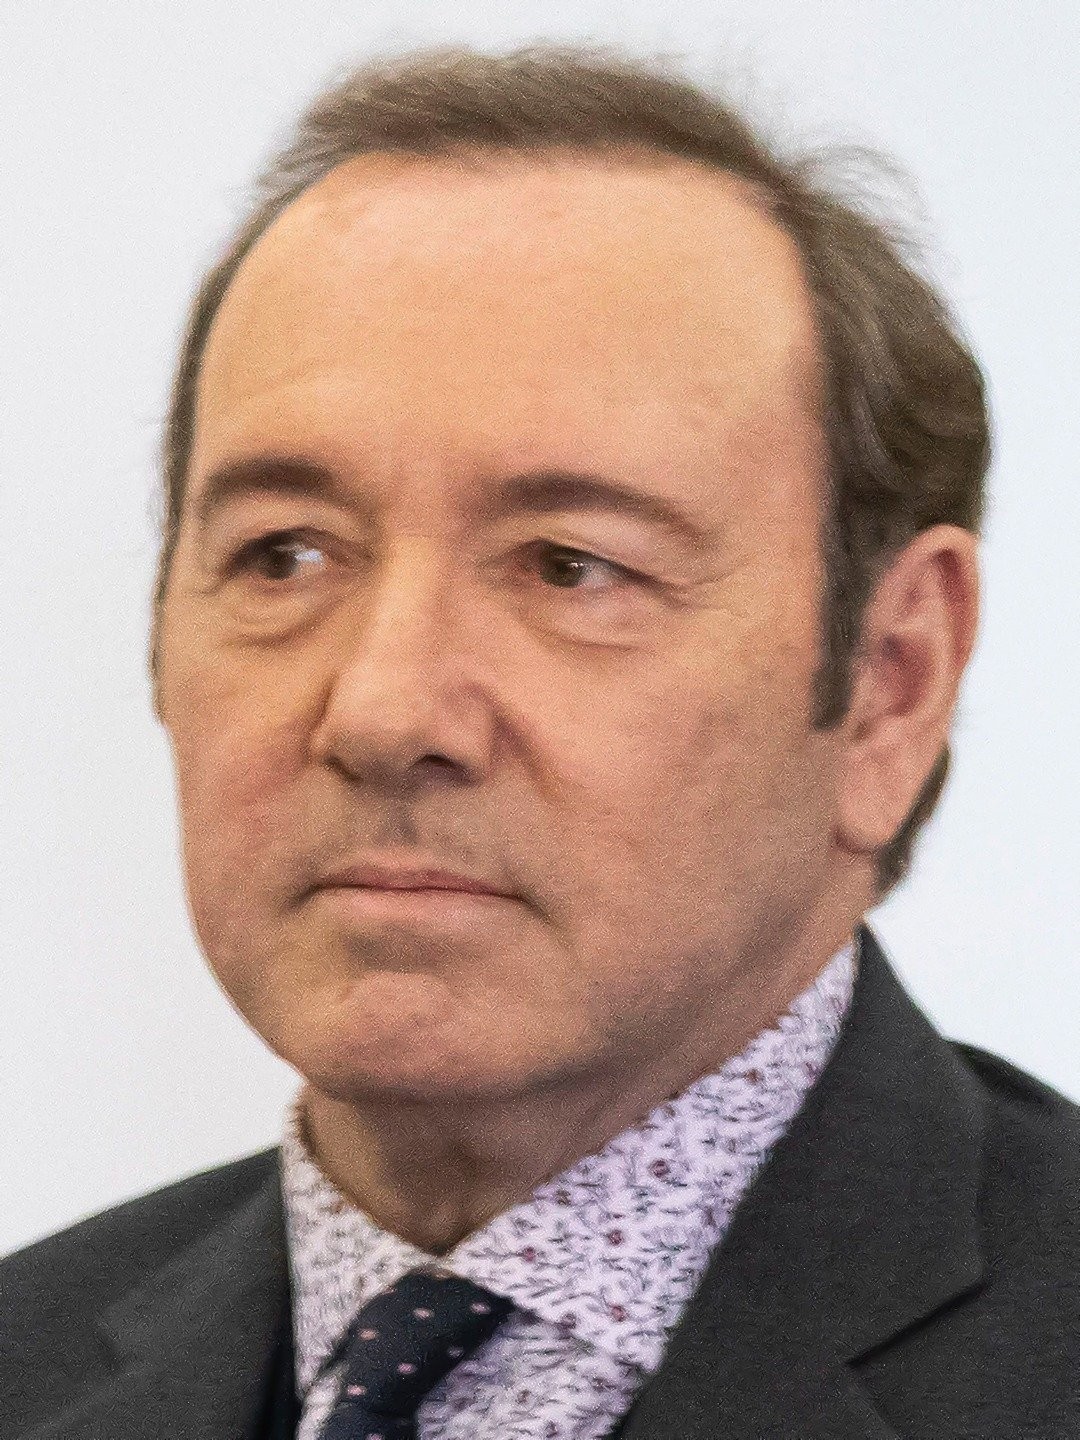 MY SPACEY STORY: Me, She, Kevin Spacey and the Usual Suspects